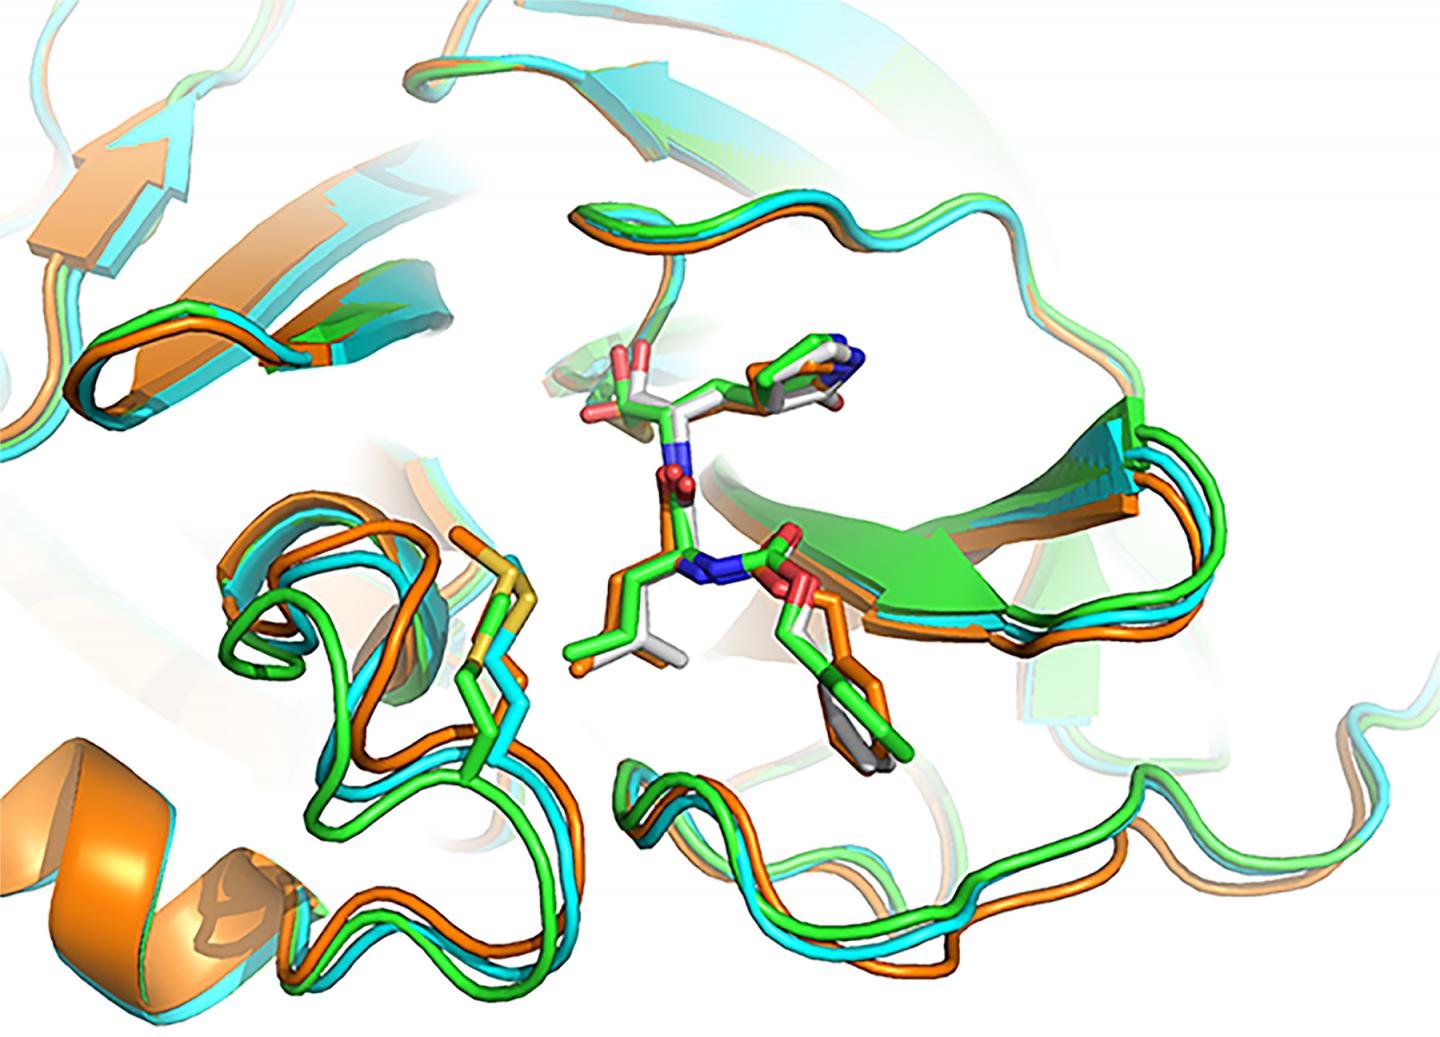 COVID-19 viral protein image- 3D modeling